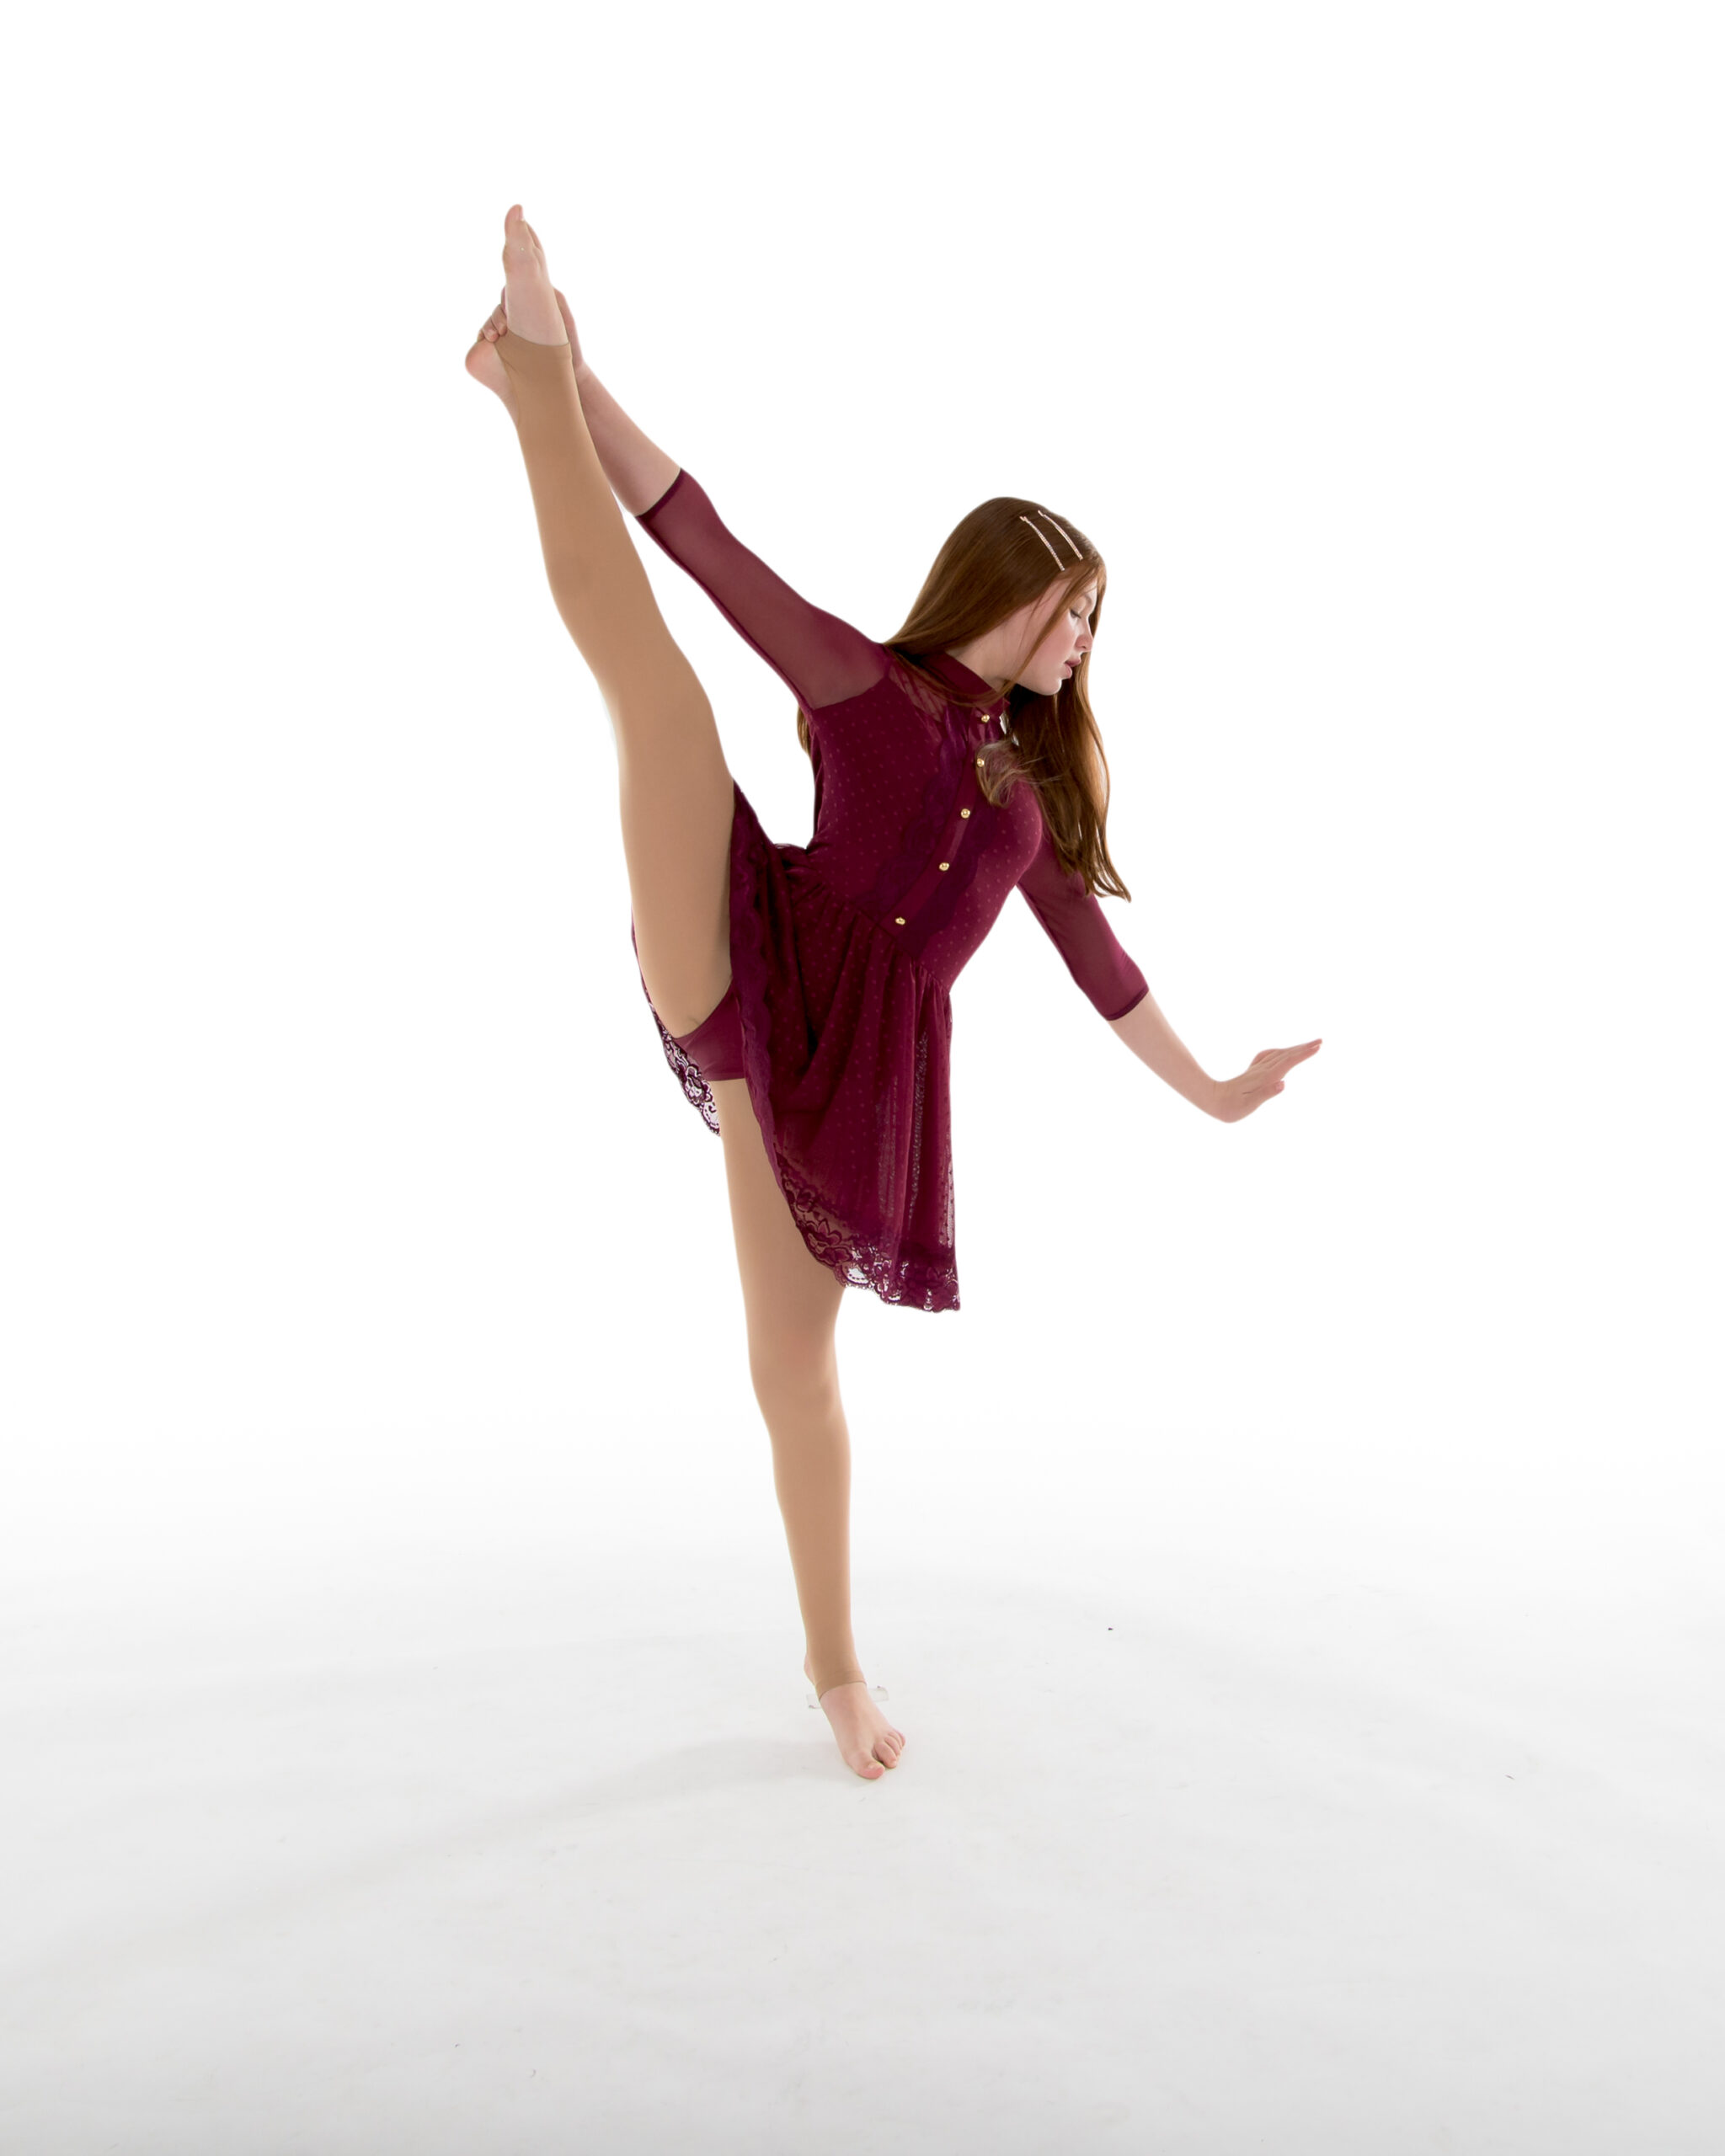 One of our Contemporary 3C+4 dancers in a leg stretch.